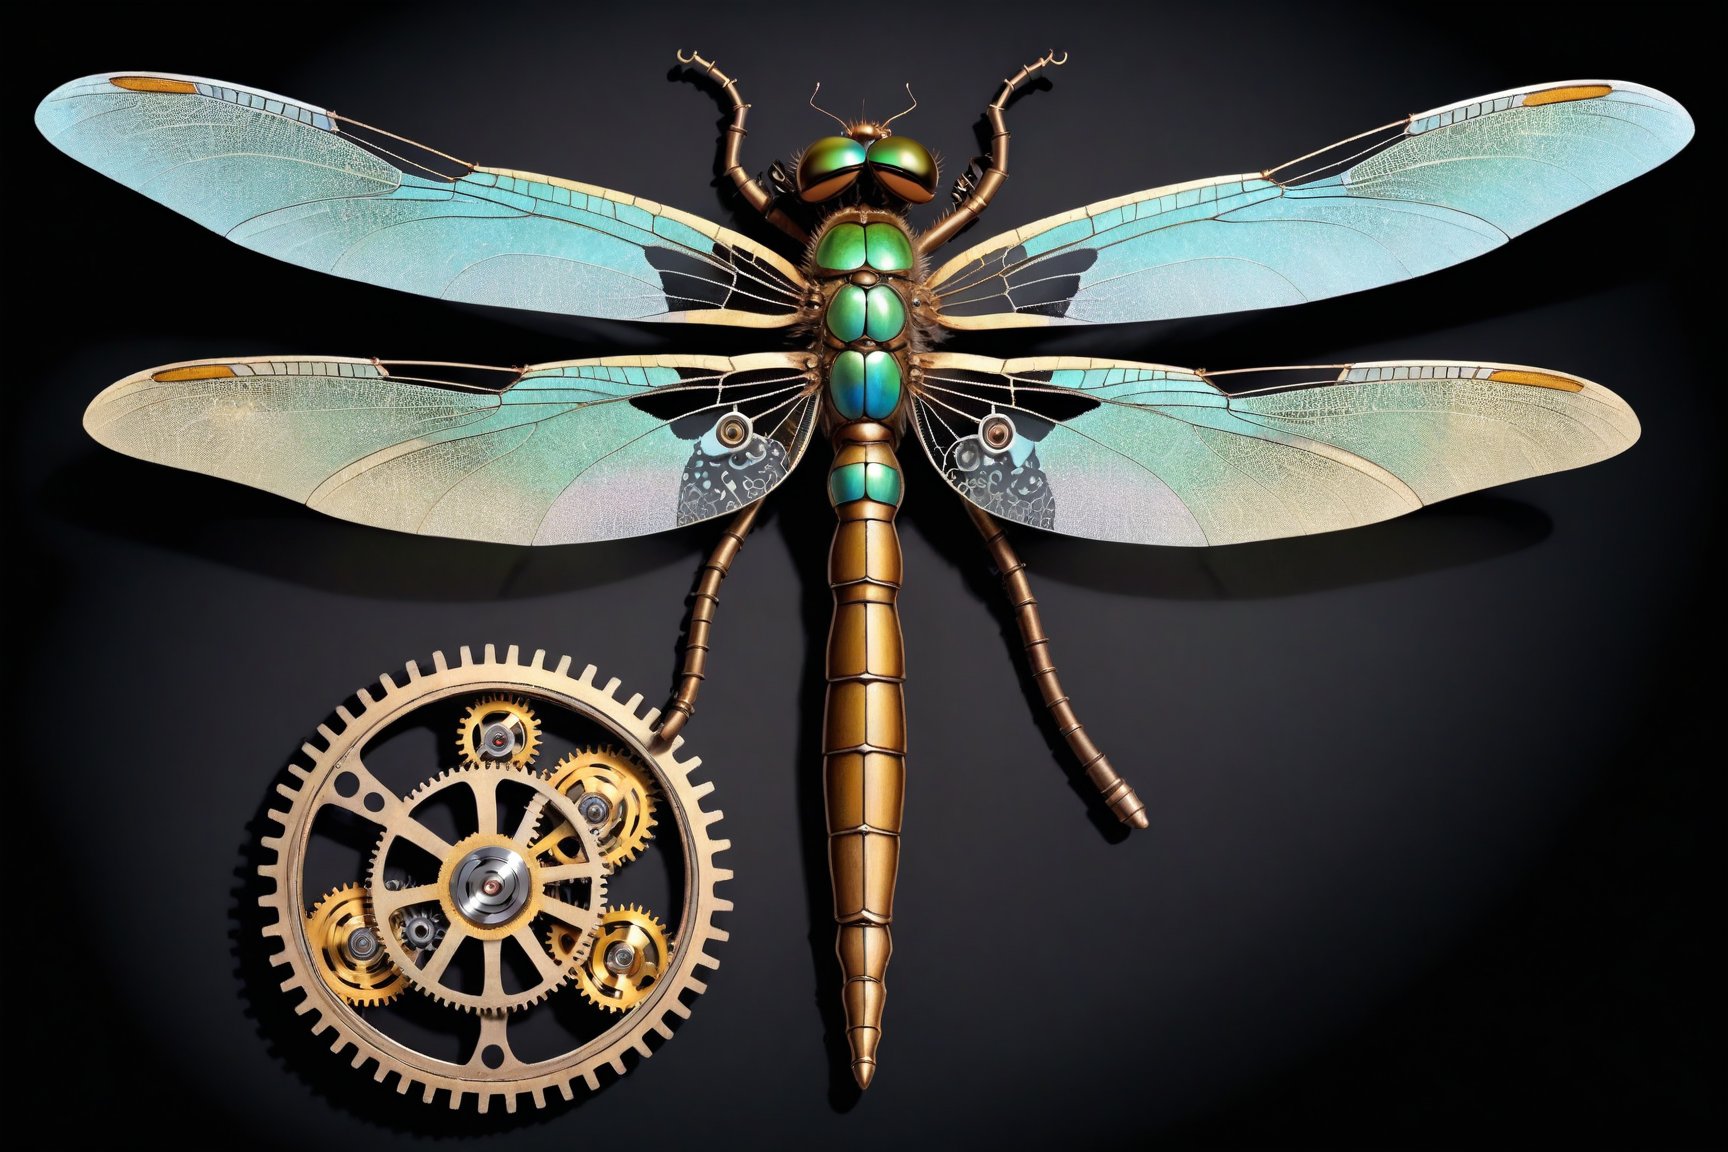 Generates a detailed steampunk style image with pastel colors and golden brown of a dragonfly seen from above. The dragonfly must be adorned with intricate gears and mechanical elements that imitate its natural structure. The image must be high resolution and show a perfect fusion between the organic and the mechanical, black background,DonMSt34mPXL,steampunk,steampunk style